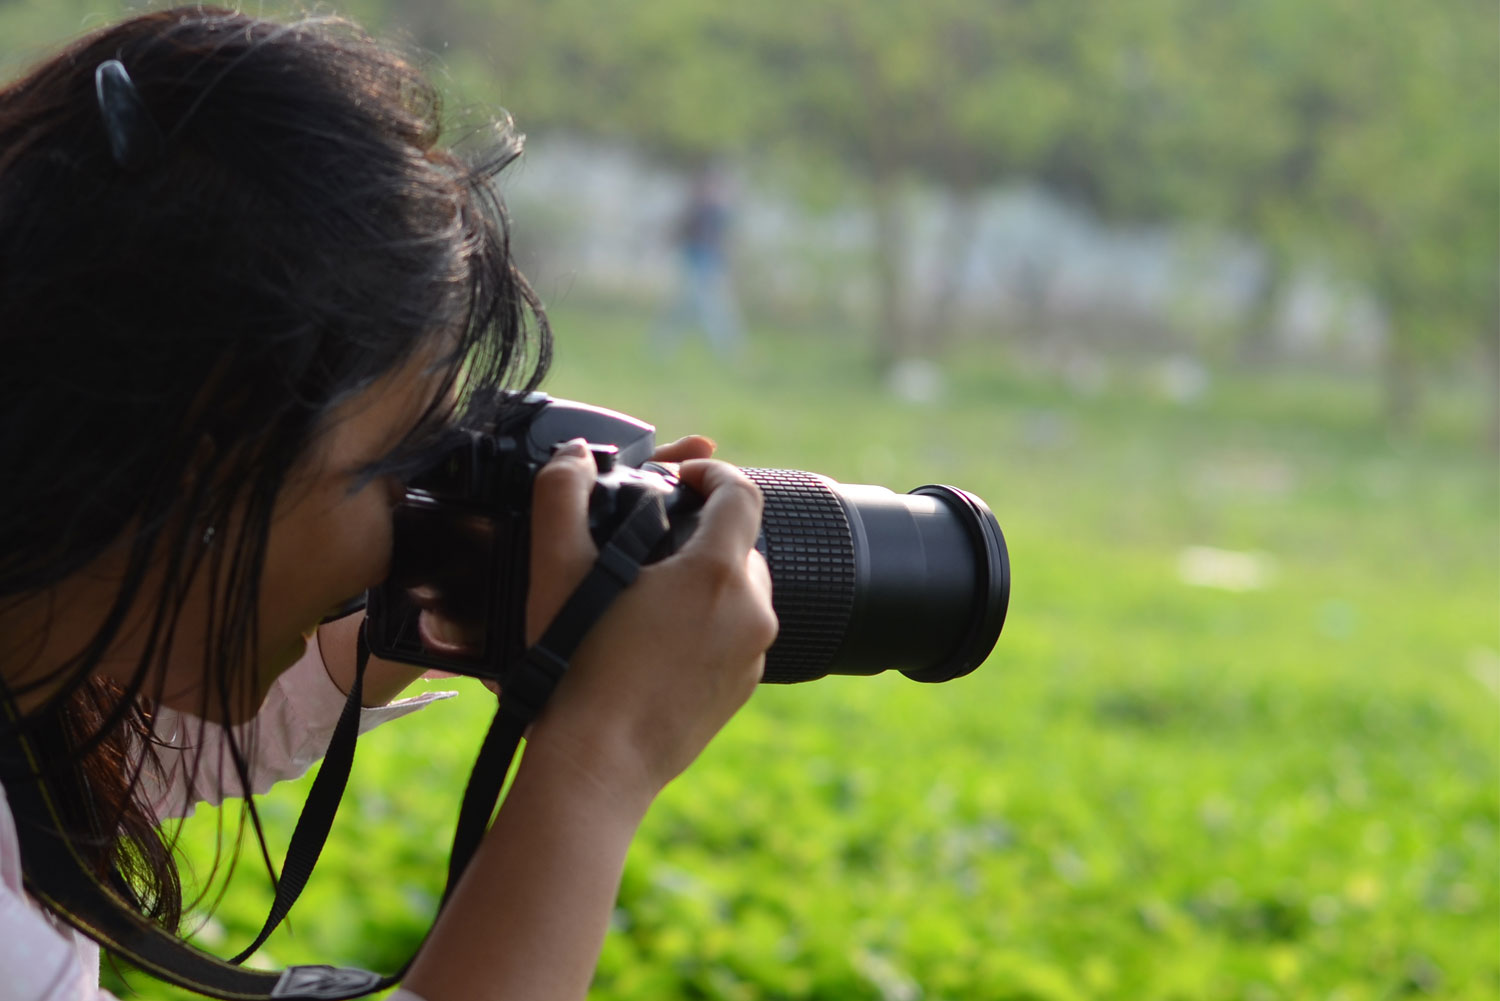 12 things need to notice before you press the shutter button